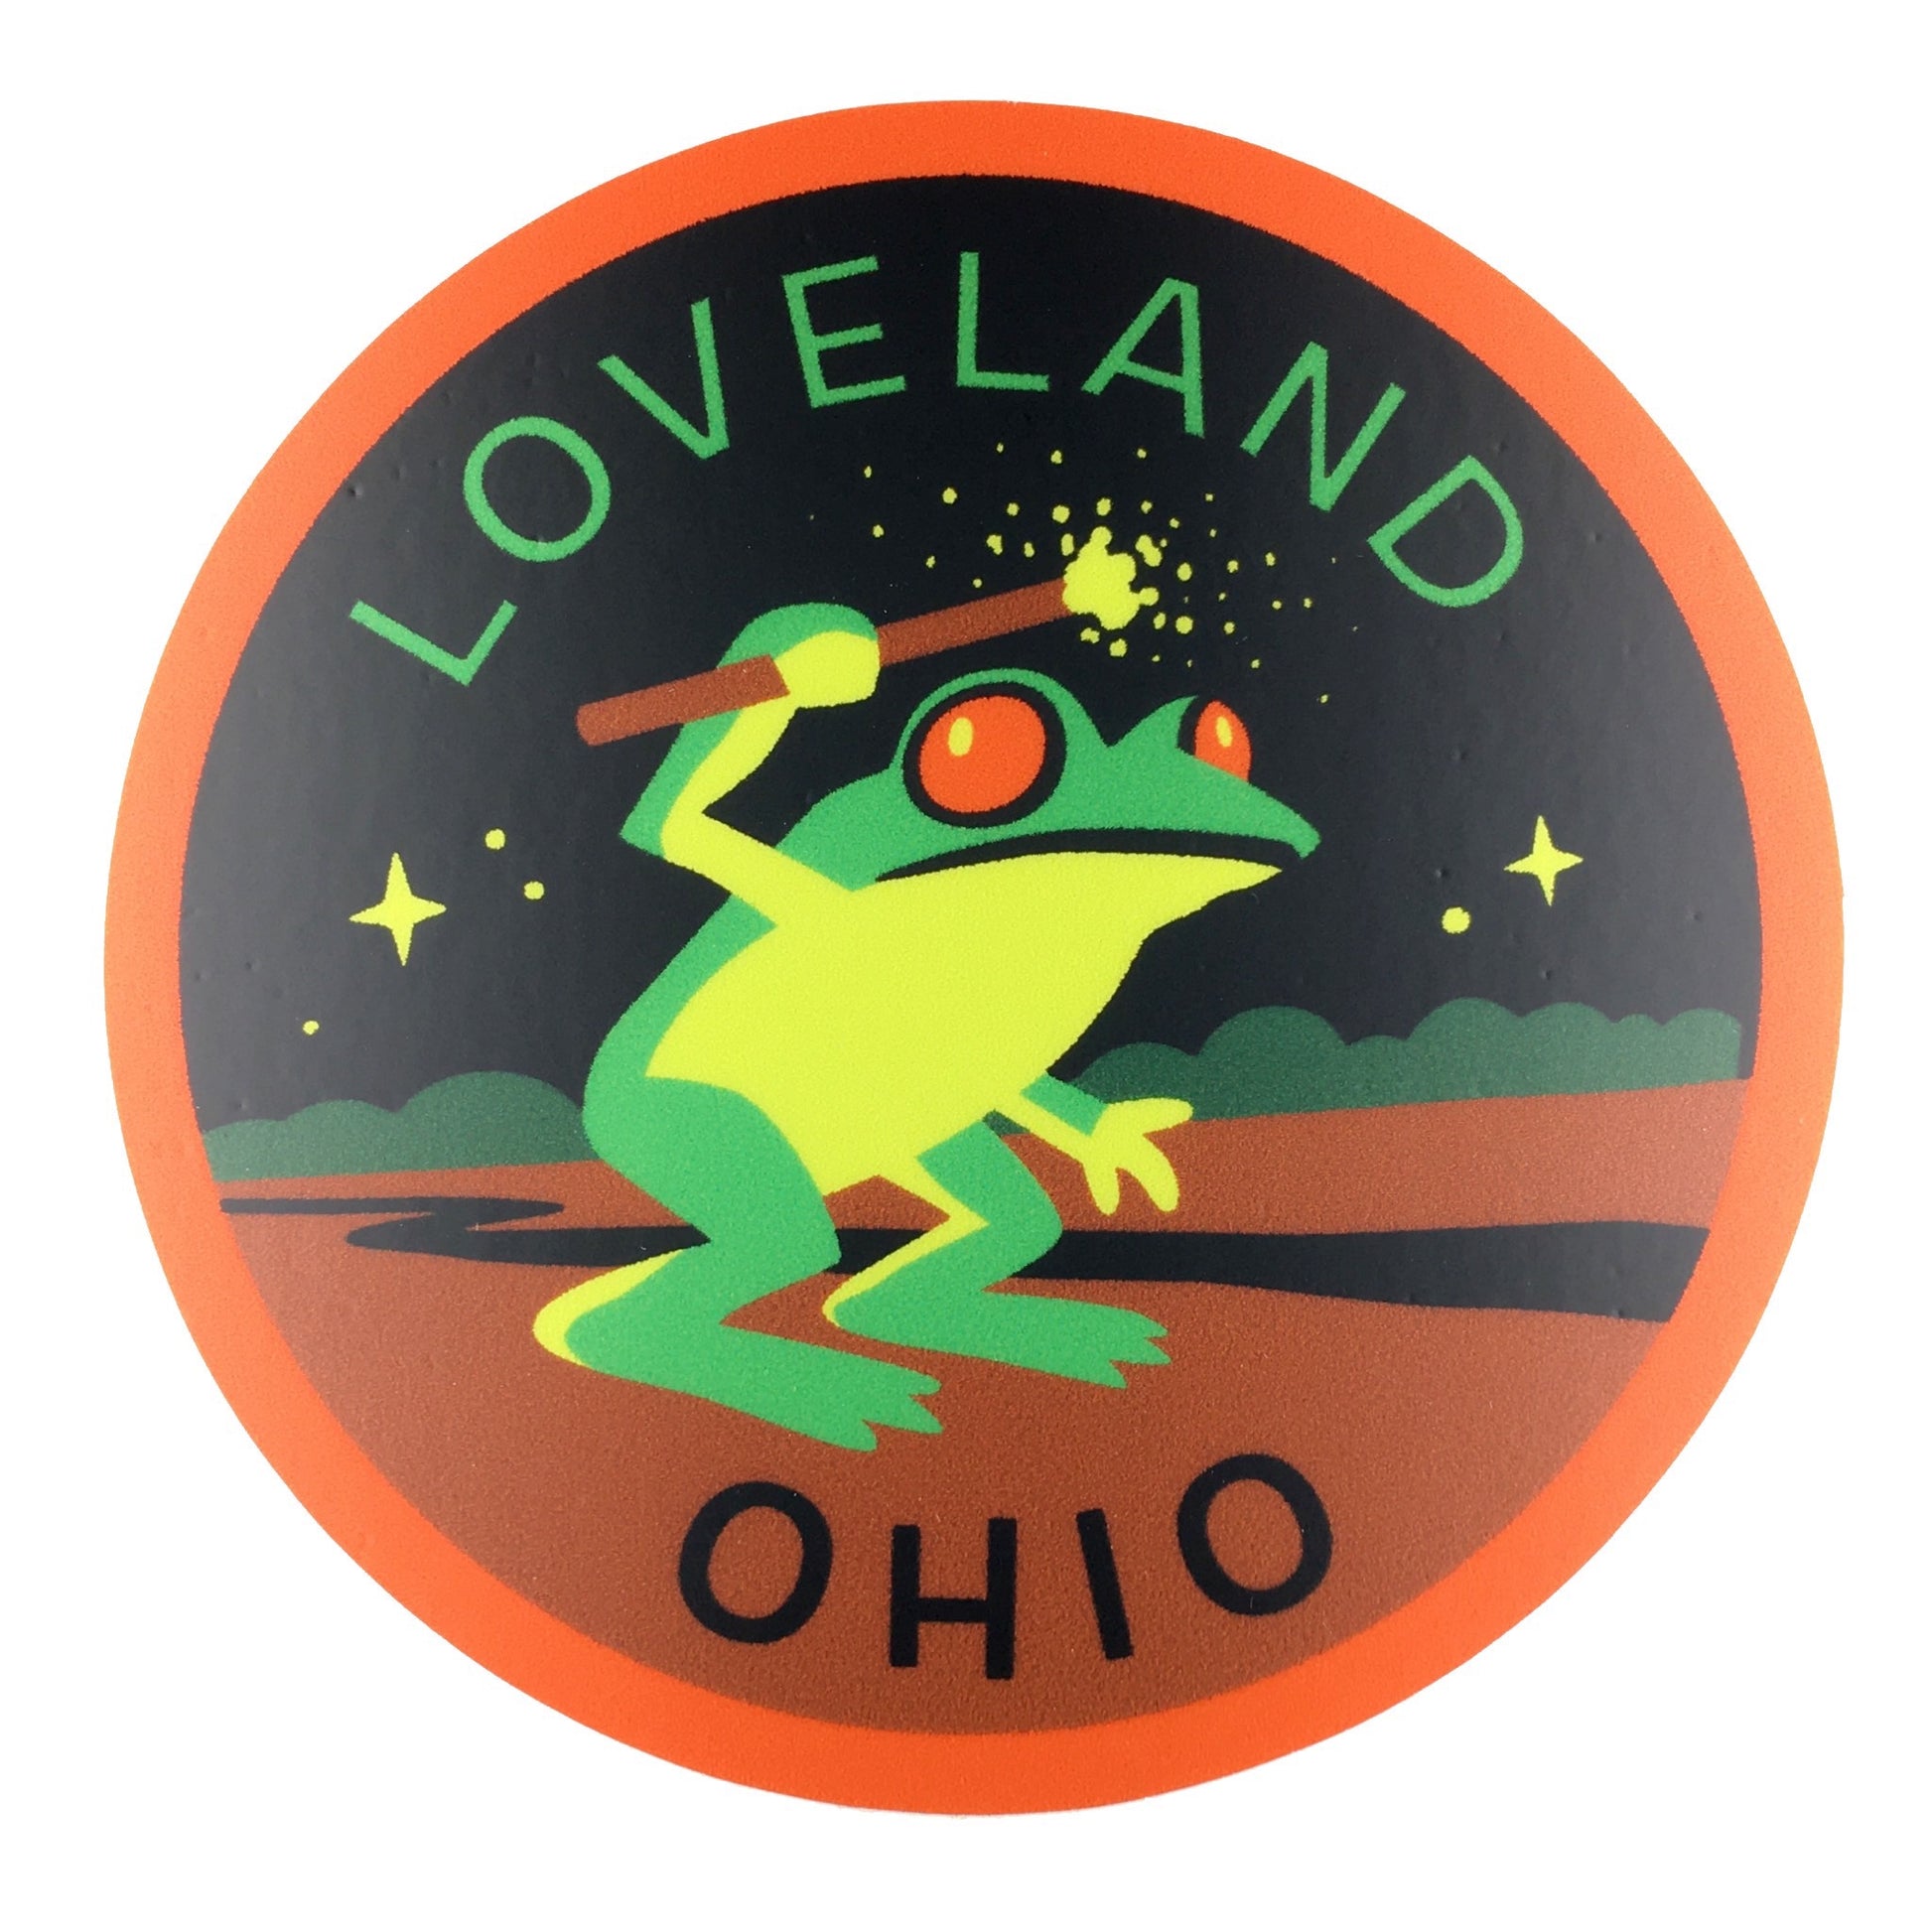 Loveland, Ohio Frogman travel patch by Monsterologist